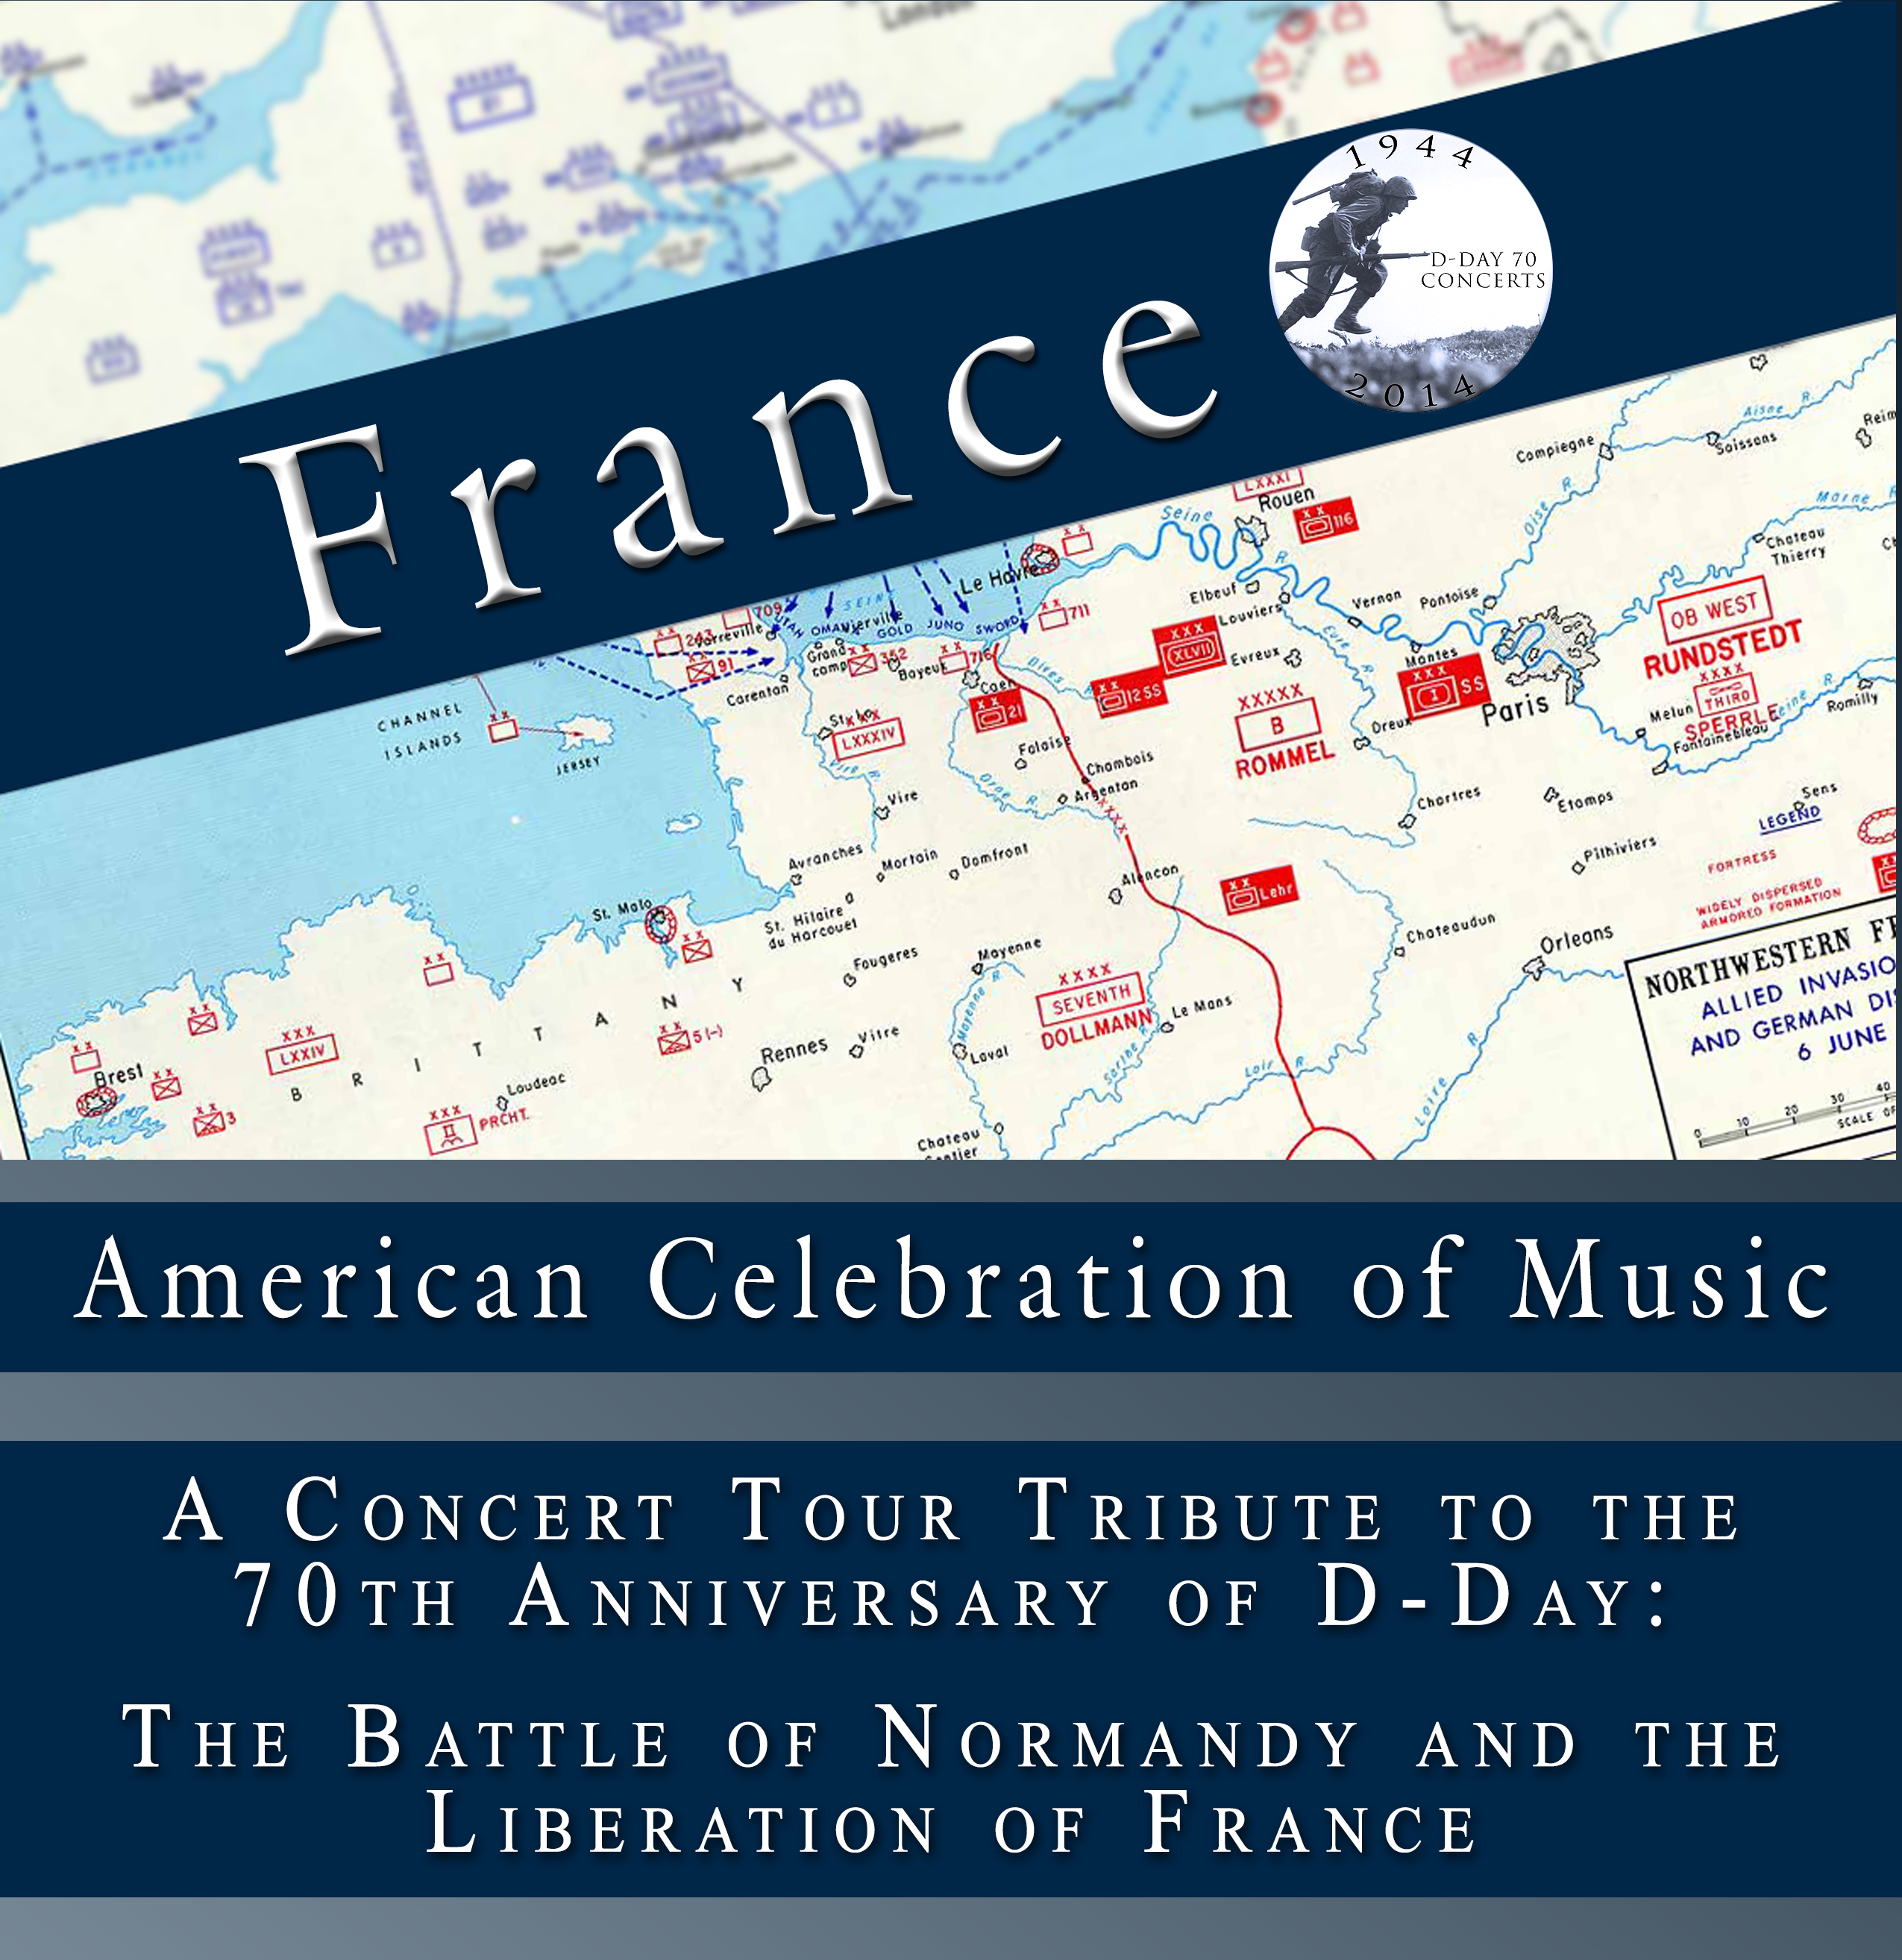 American Celebration of Music in France